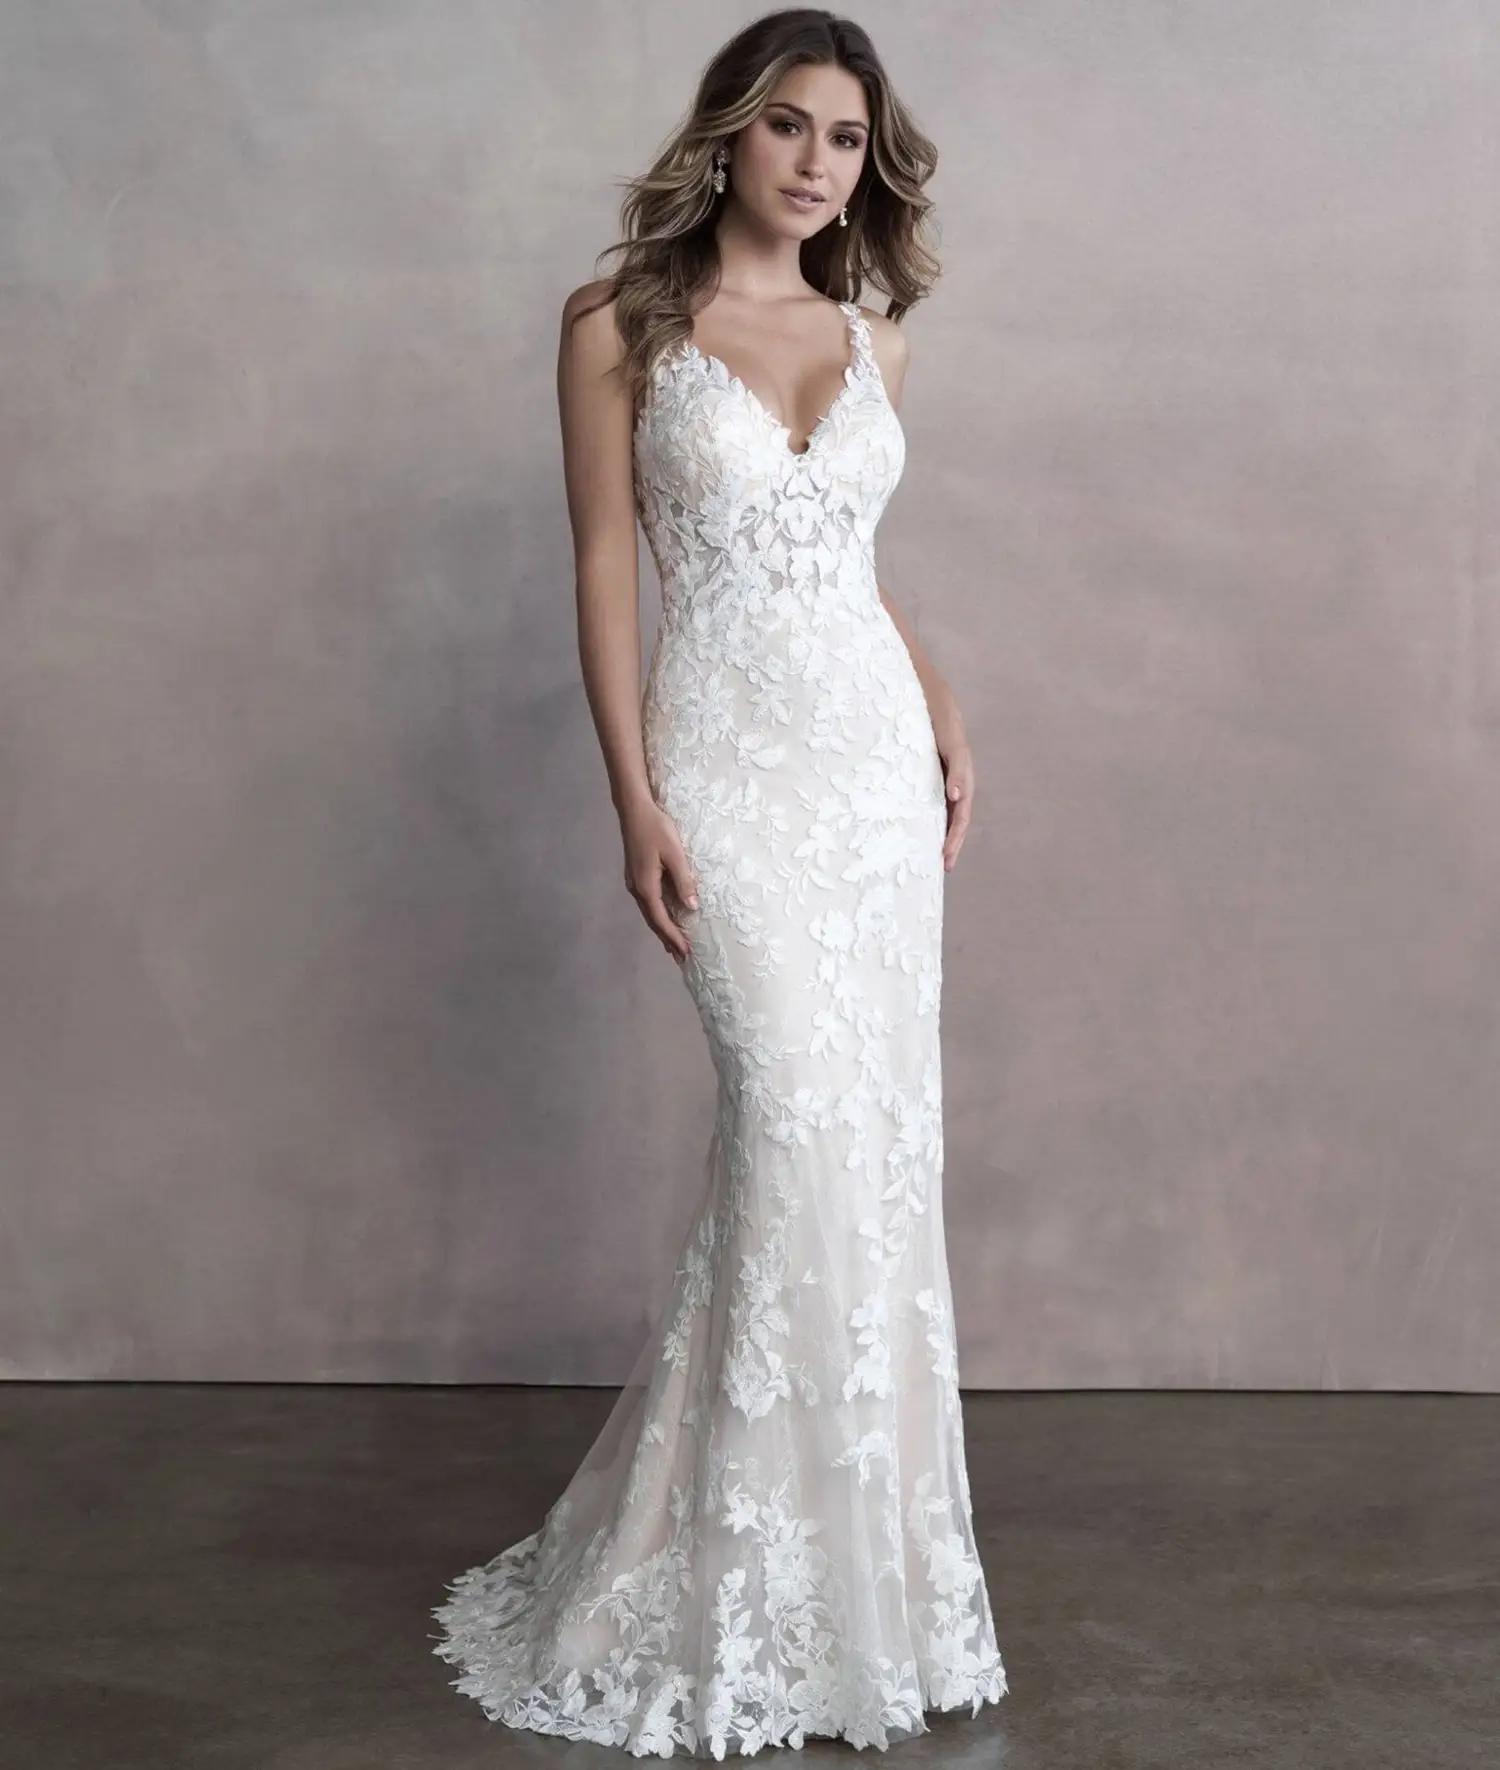 When To Buy Your Dress? Image